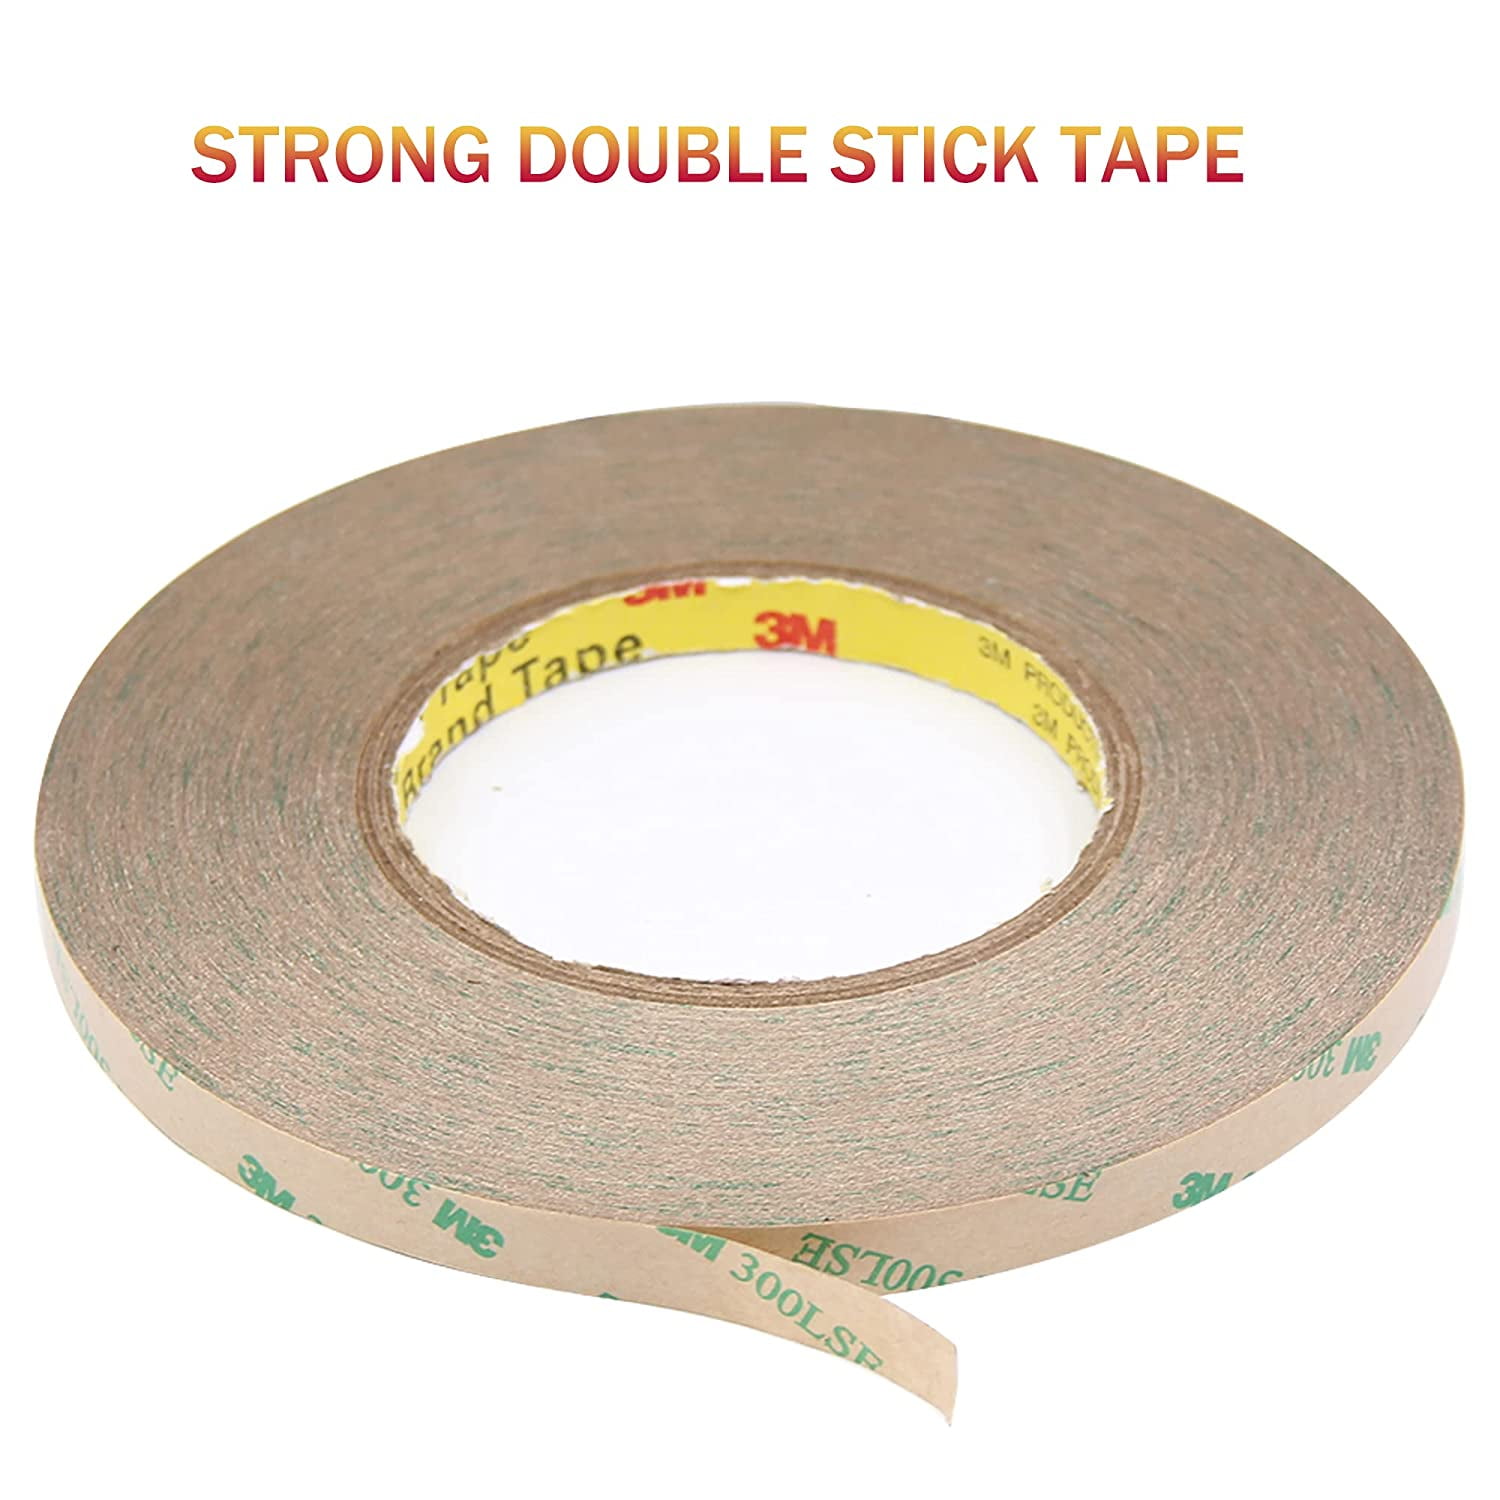 100FT 3M Double side Acrylic Foam Adhesive Tape 4 10mm width 5630 5050 LED light 